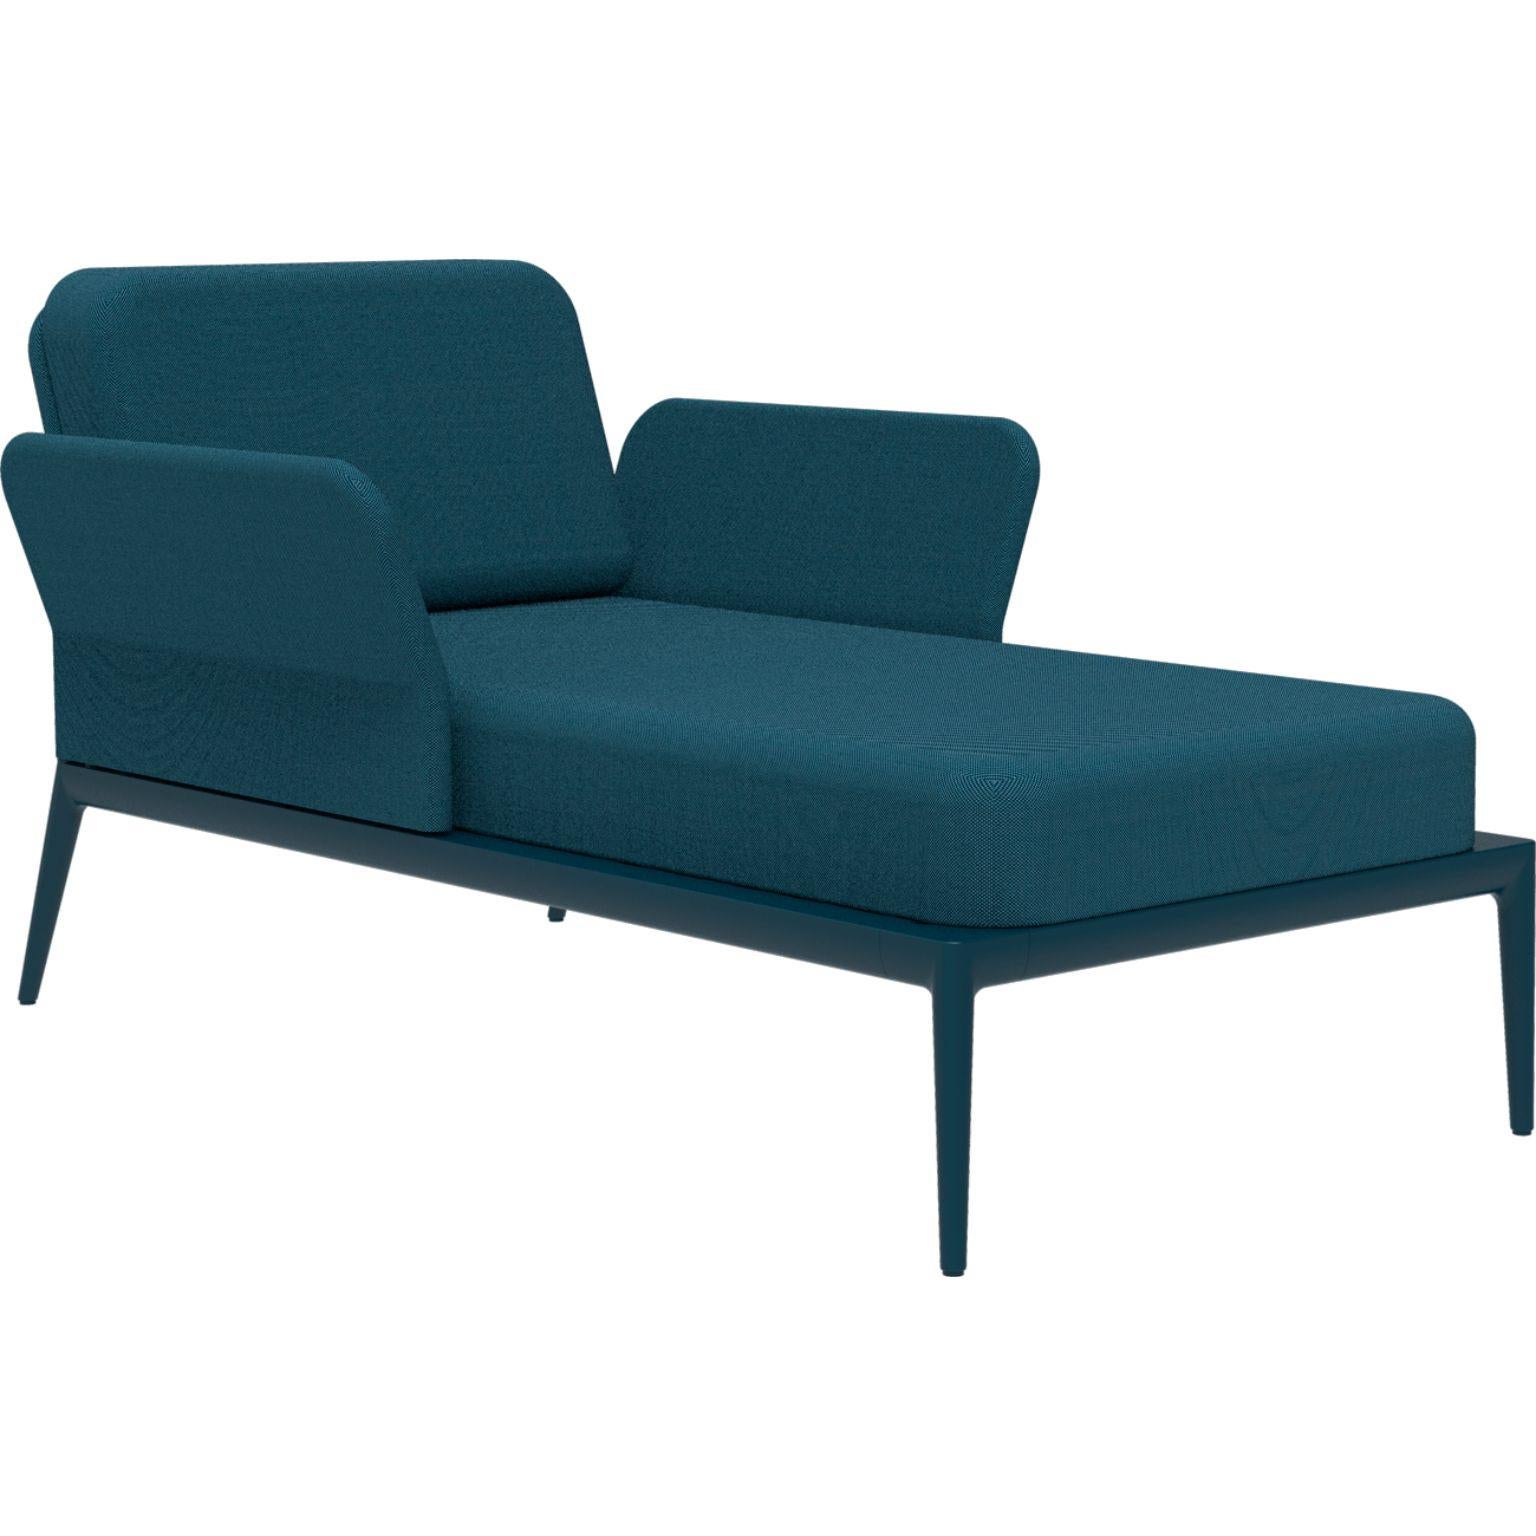 Cover navy divan by MOWEE.
Dimensions: D91 x W155 x H81 cm (seat height 42 cm).
Material: Aluminum and upholstery.
Weight: 30 kg.
Also available in different colors and finishes.

An unmistakable collection for its beauty and robustness. A